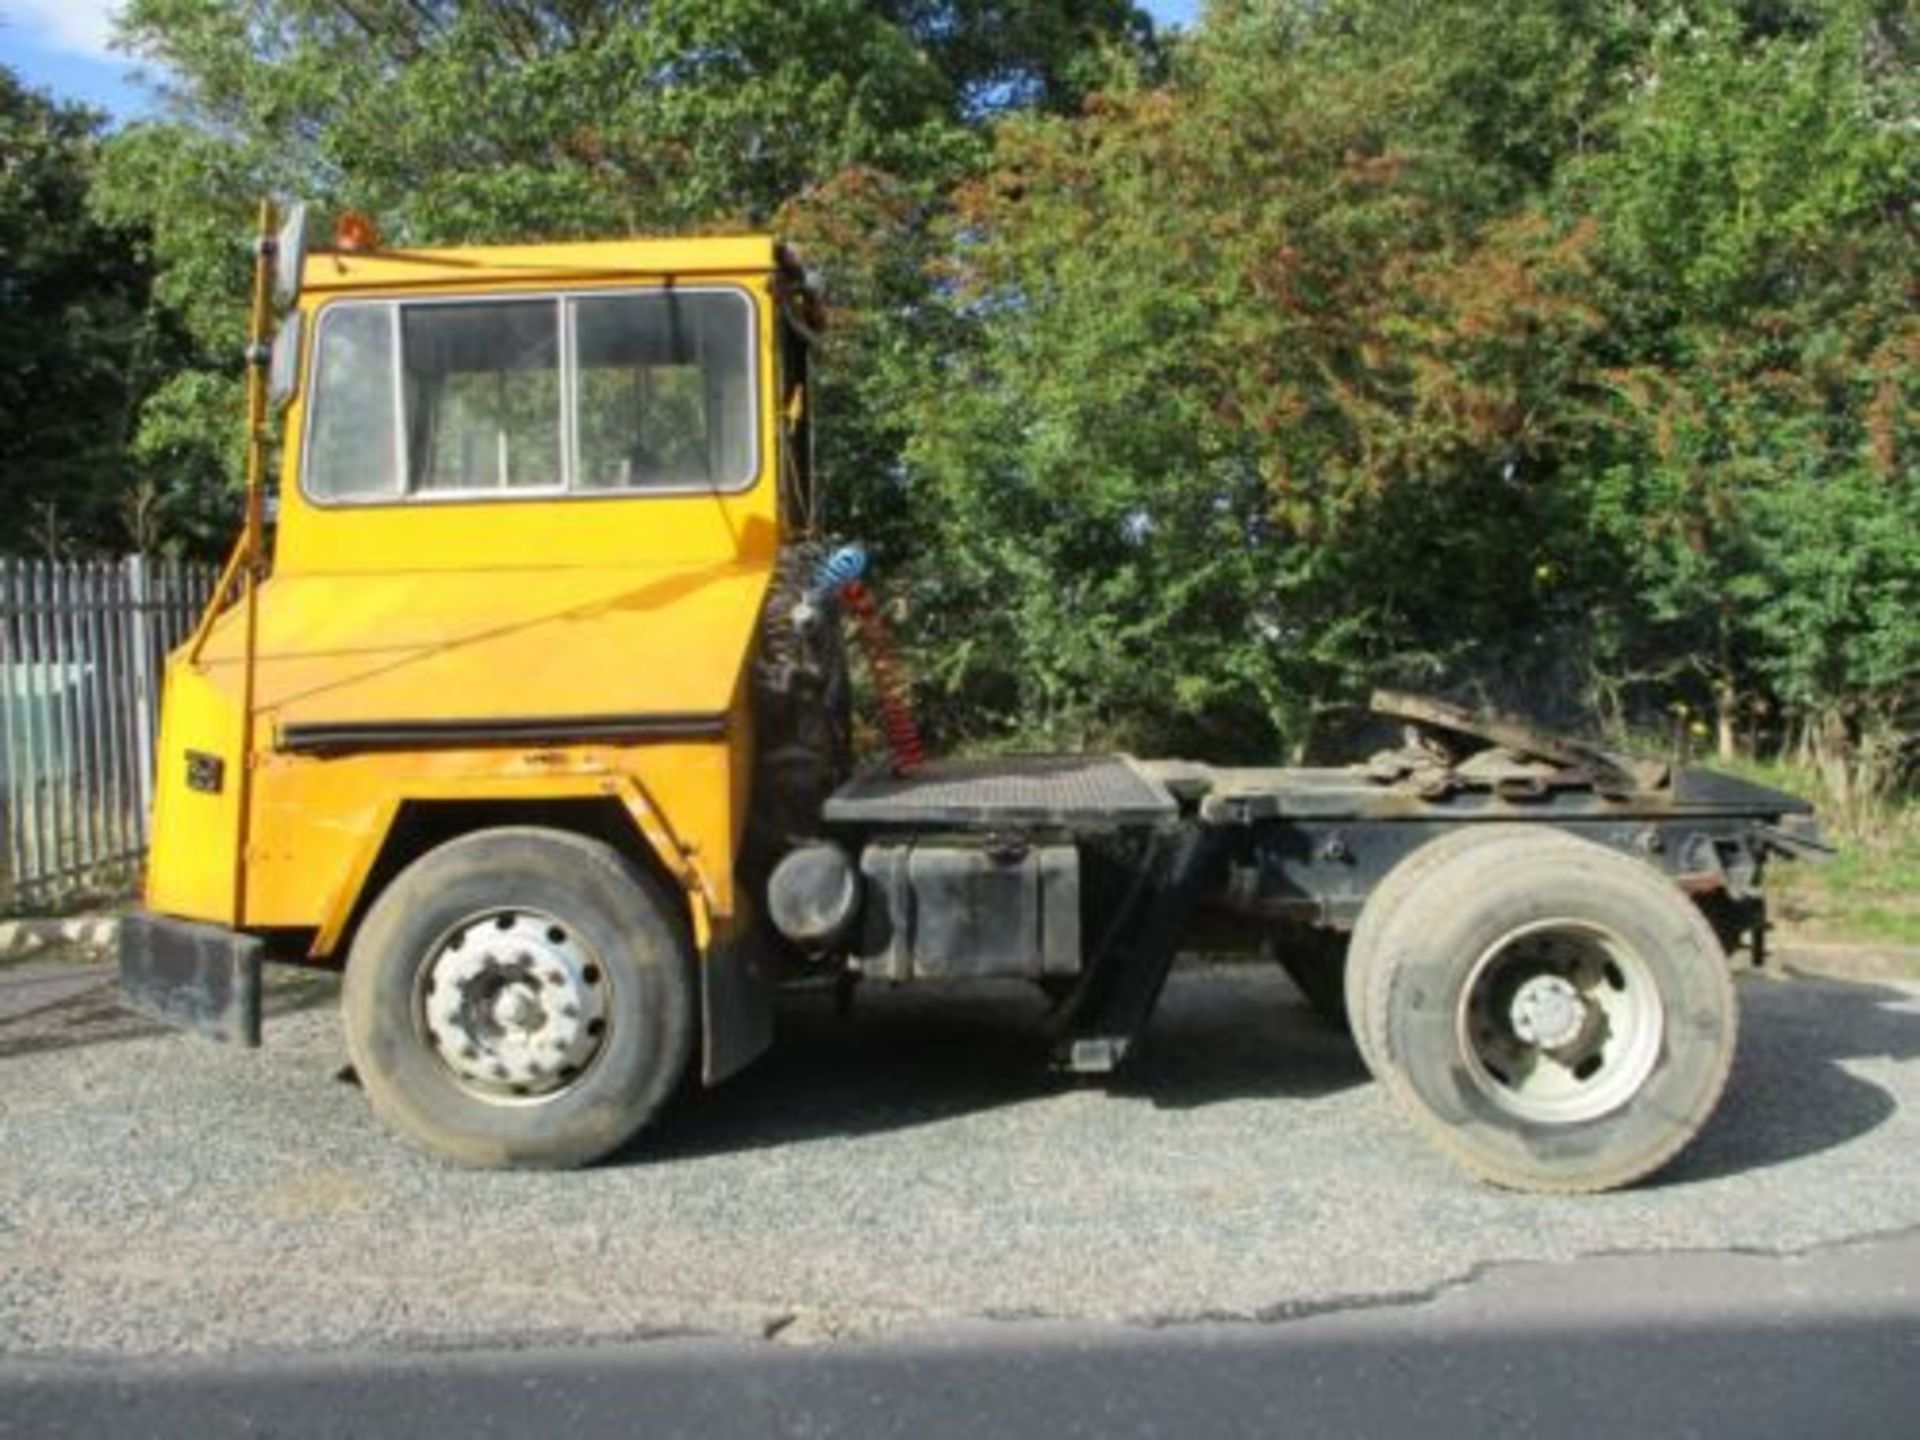 RELIANCE DOCK SPOTTER SHUNTER TOW TUG TRACTOR UNIT PERKINS V8 TERBERG DELIVERY